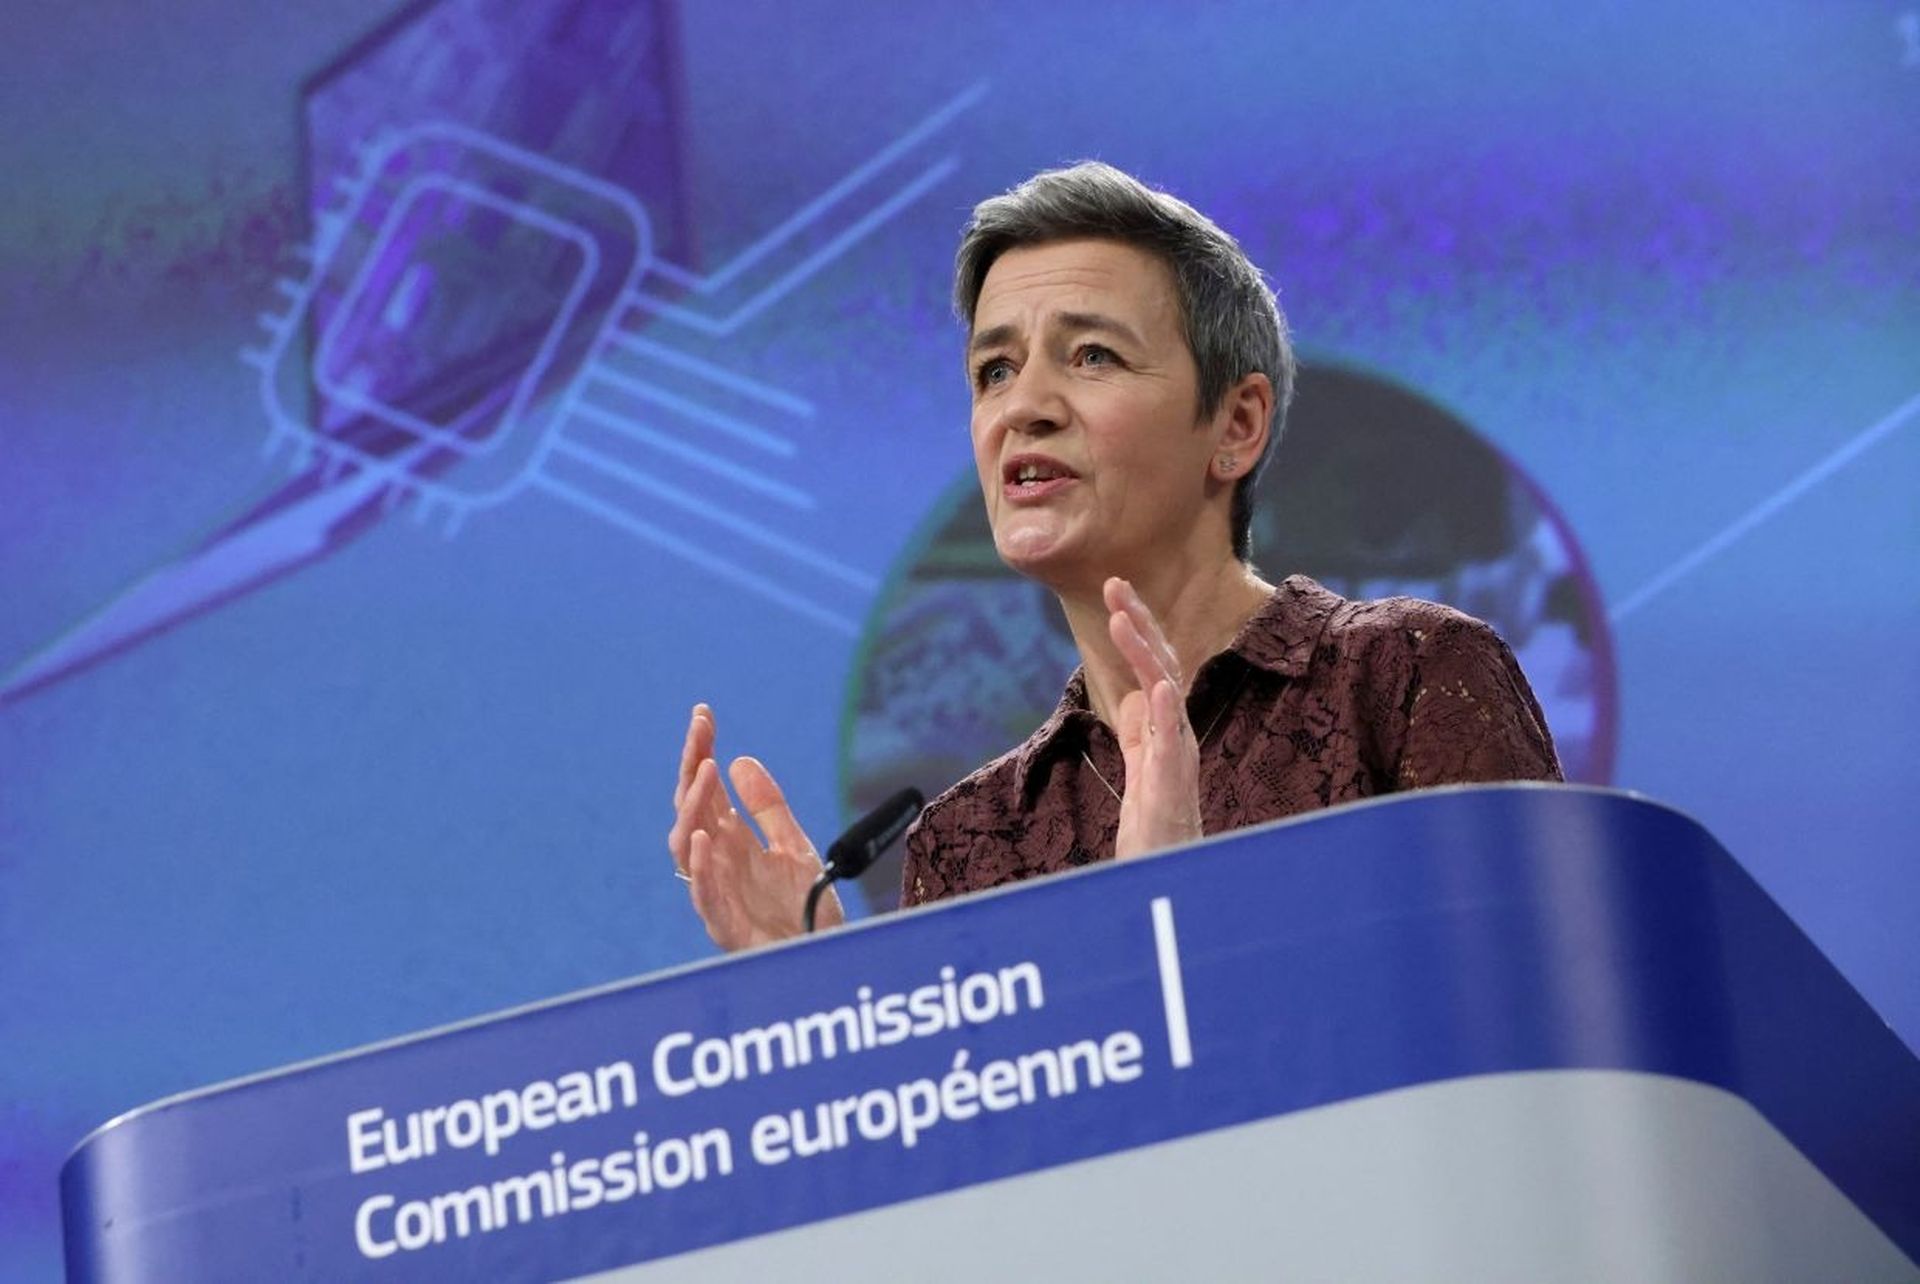 EU big tech regulation could happen sooner than expected. The EU has set a goal of enforcing the Digital Markets Act (DMA) by spring 2023, Commission executive vice president Margrethe Vestager announced at the International Competition Network (ICN) conference last week.